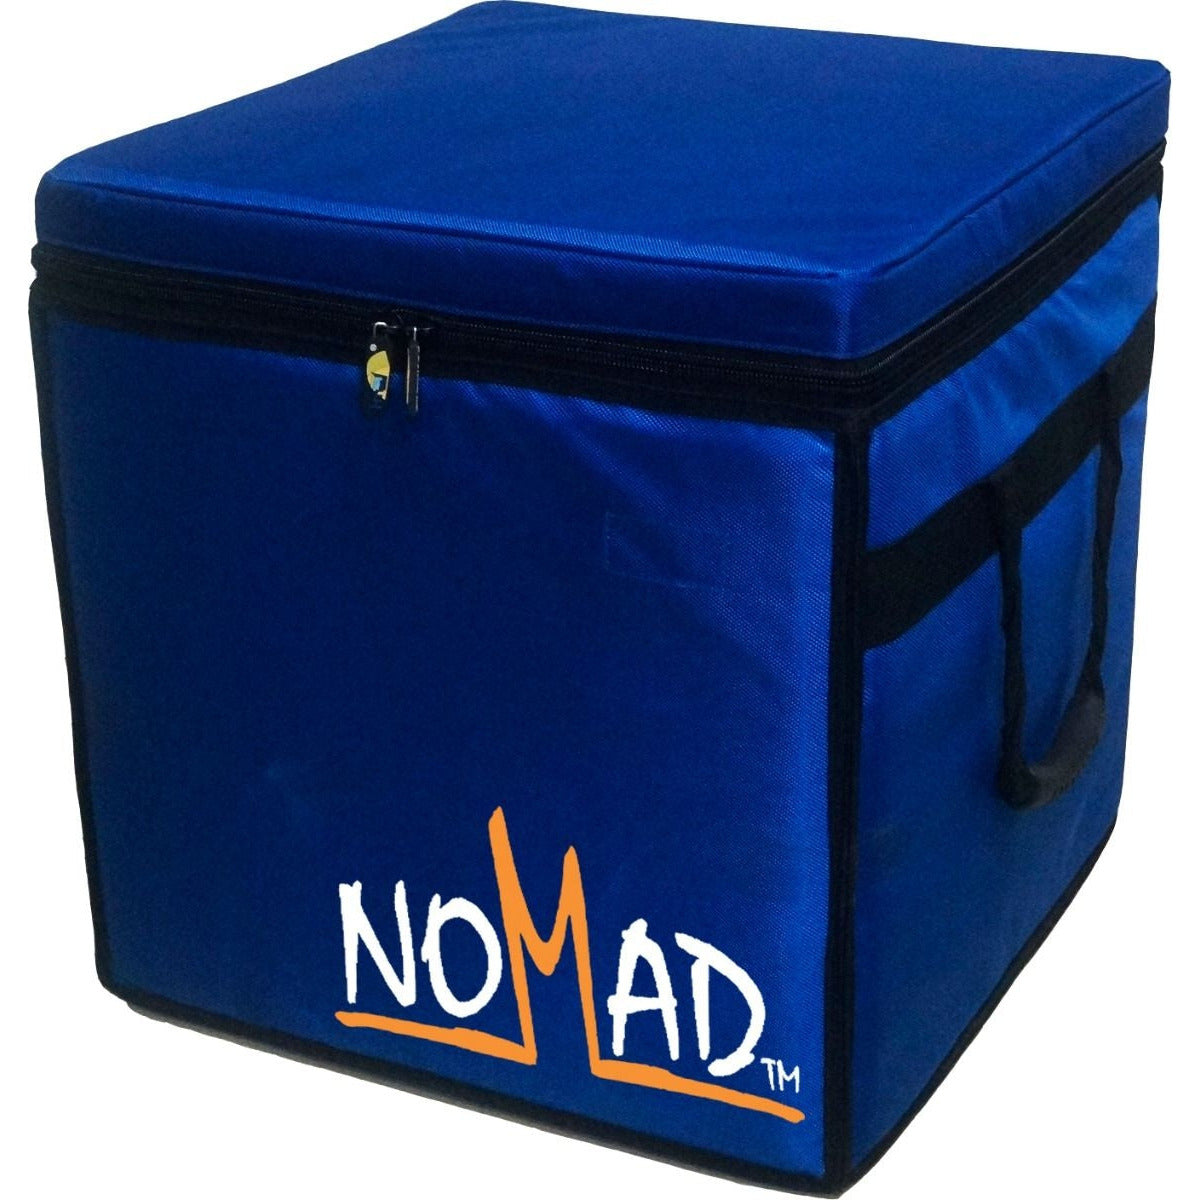 Cold Chain Box -  76 Litres Of Cooling Up To 60 Hours